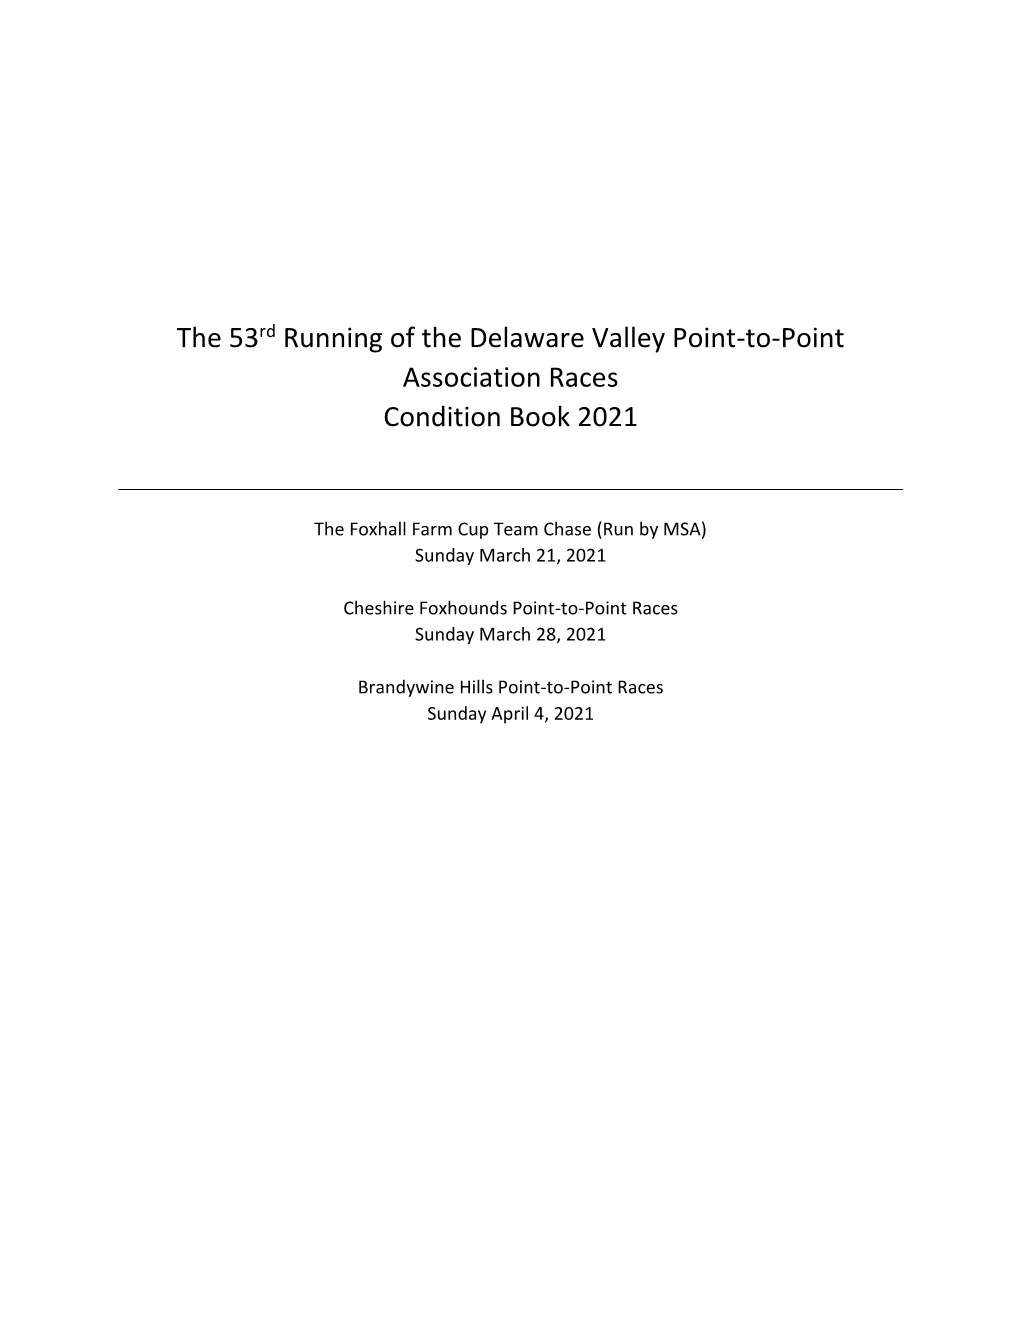 The 53Rd Running of the Delaware Valley Point-To-Point Association Races Condition Book 2021